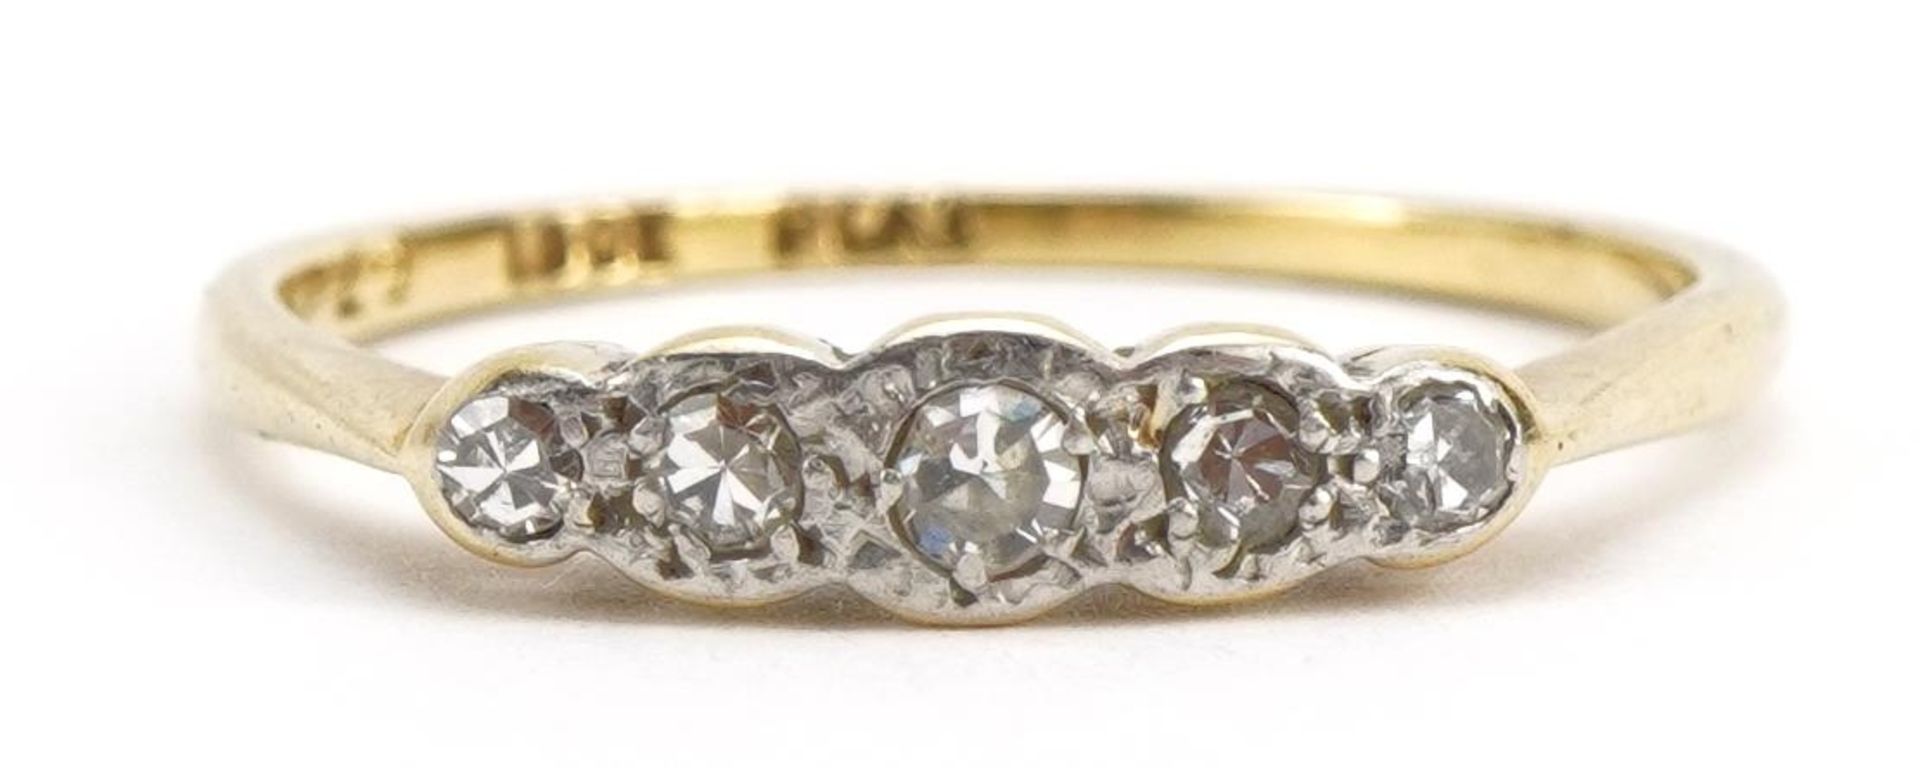 18ct gold and platinum diamond five stone ring, size L/M, 1.6g : For further information on this lot